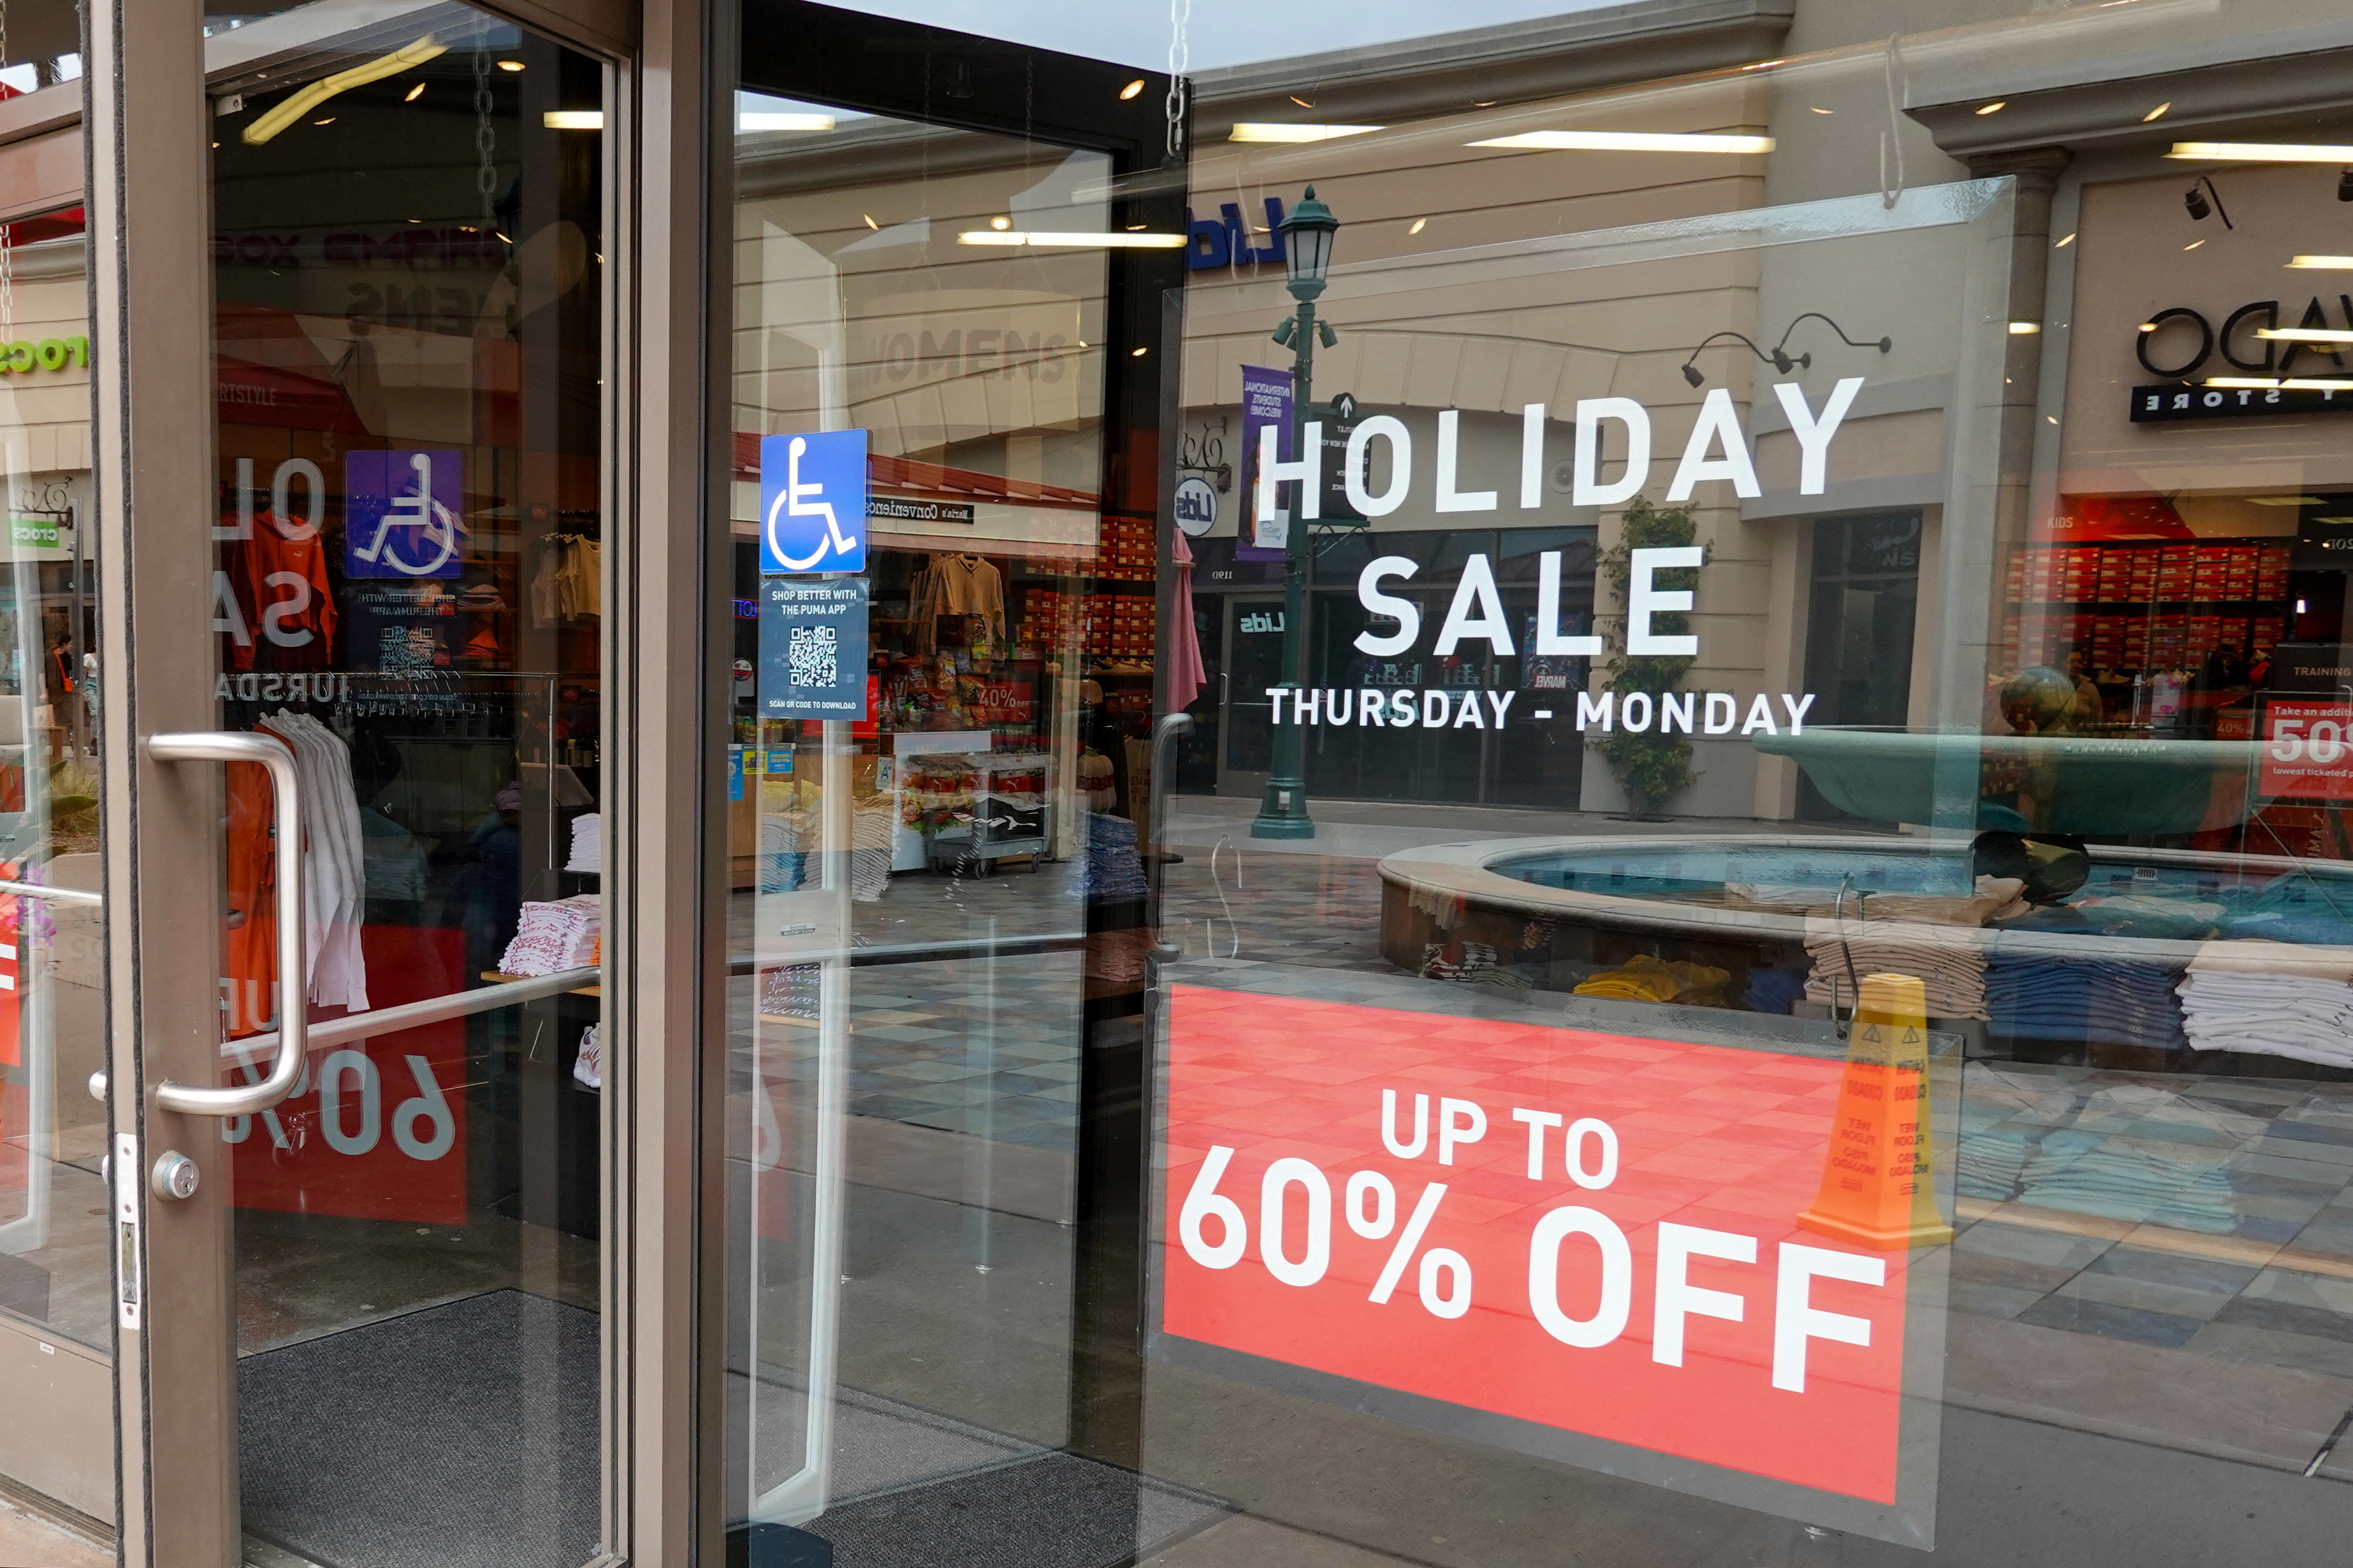 Memorial Day sale signs shown for Memorial Day holiday